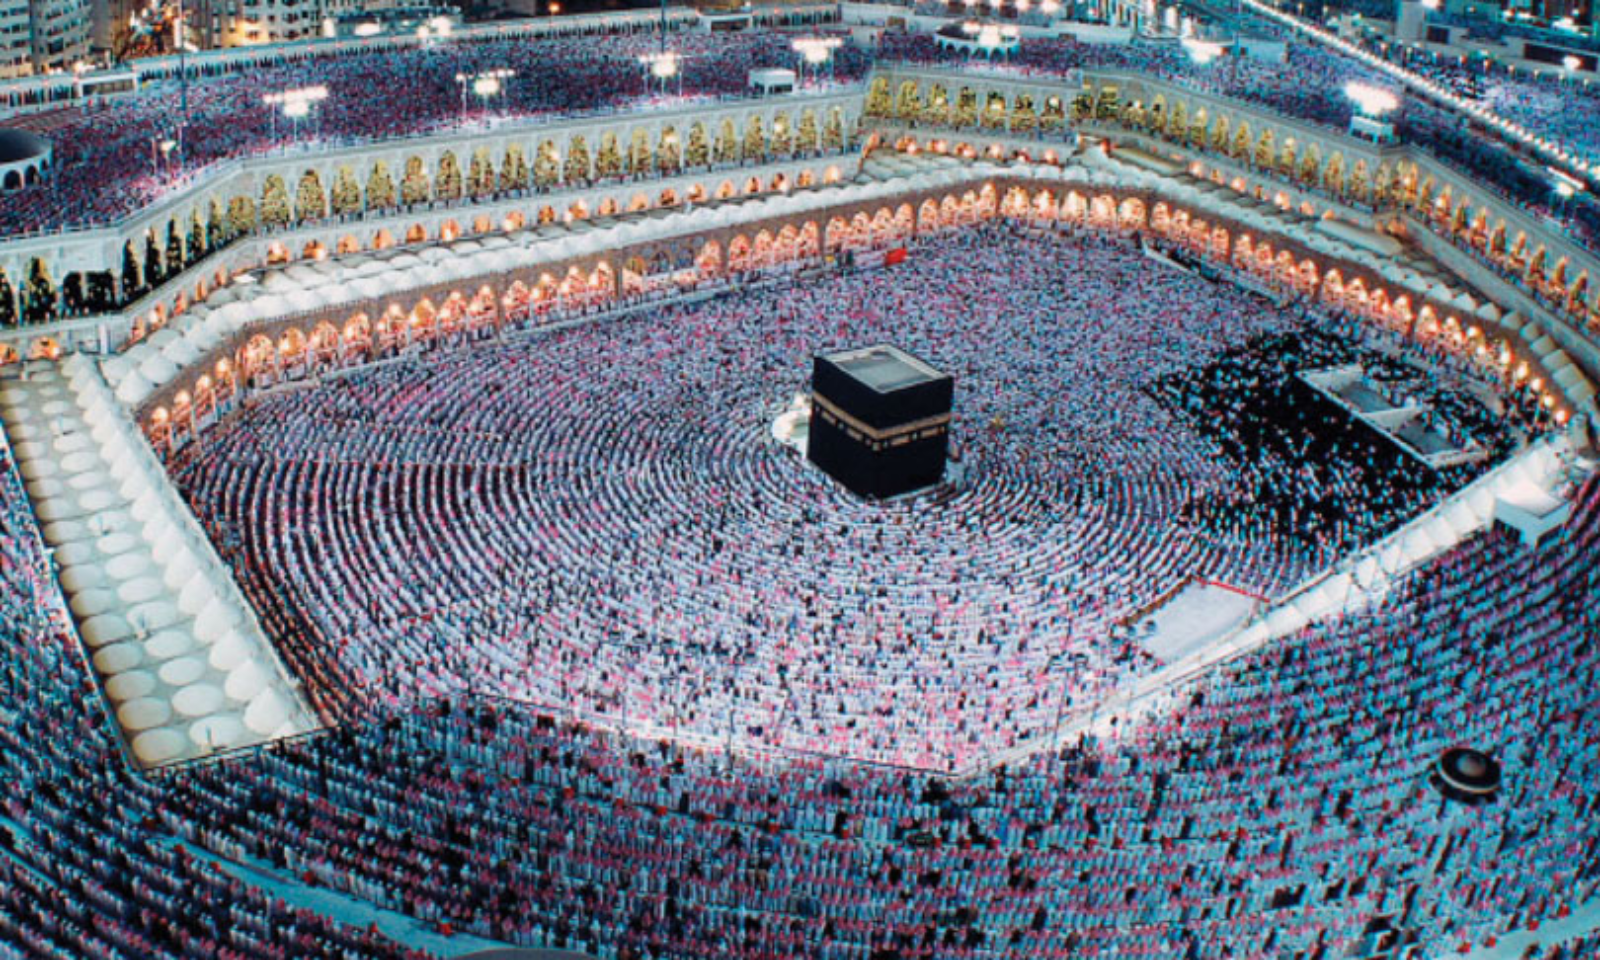 Hajj 2023: Gujarat High Court Directs State Haj Committee To Respond To Pilgrim's Representation For Change Of Embarkation Point